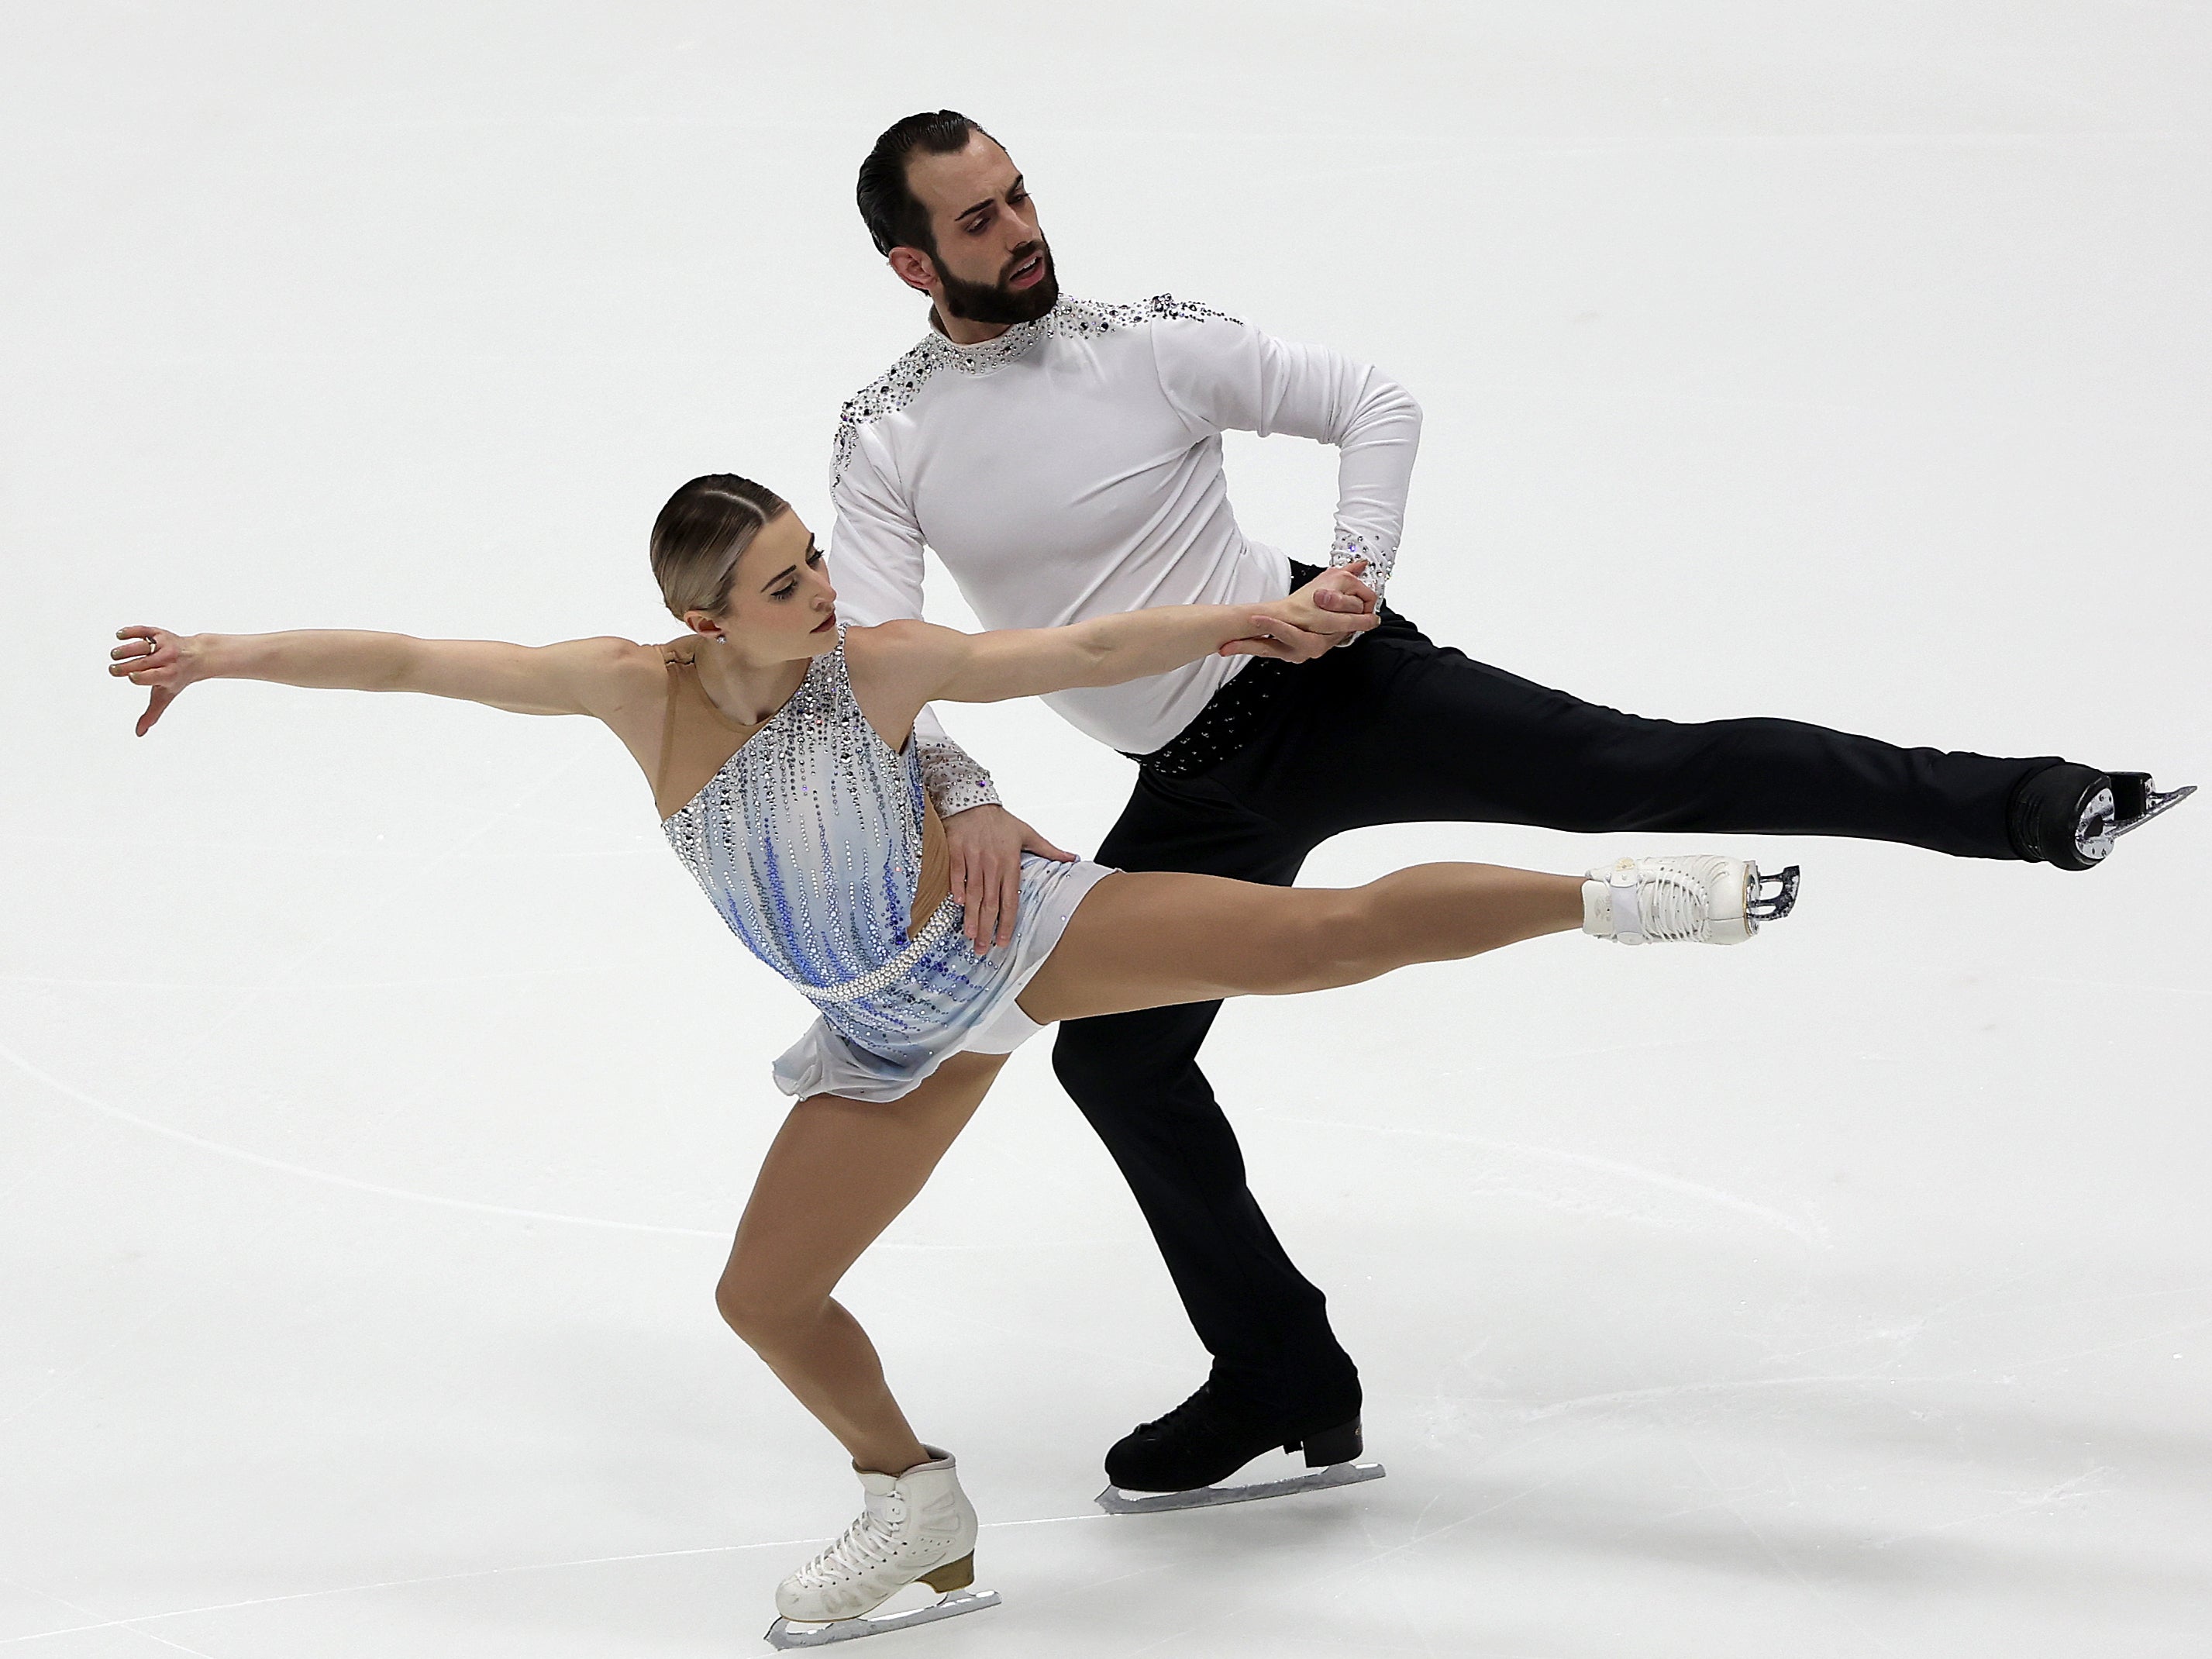 Ashley Cain-Gribble and Timothy LeDuc compete at the US Figure Skating Championships